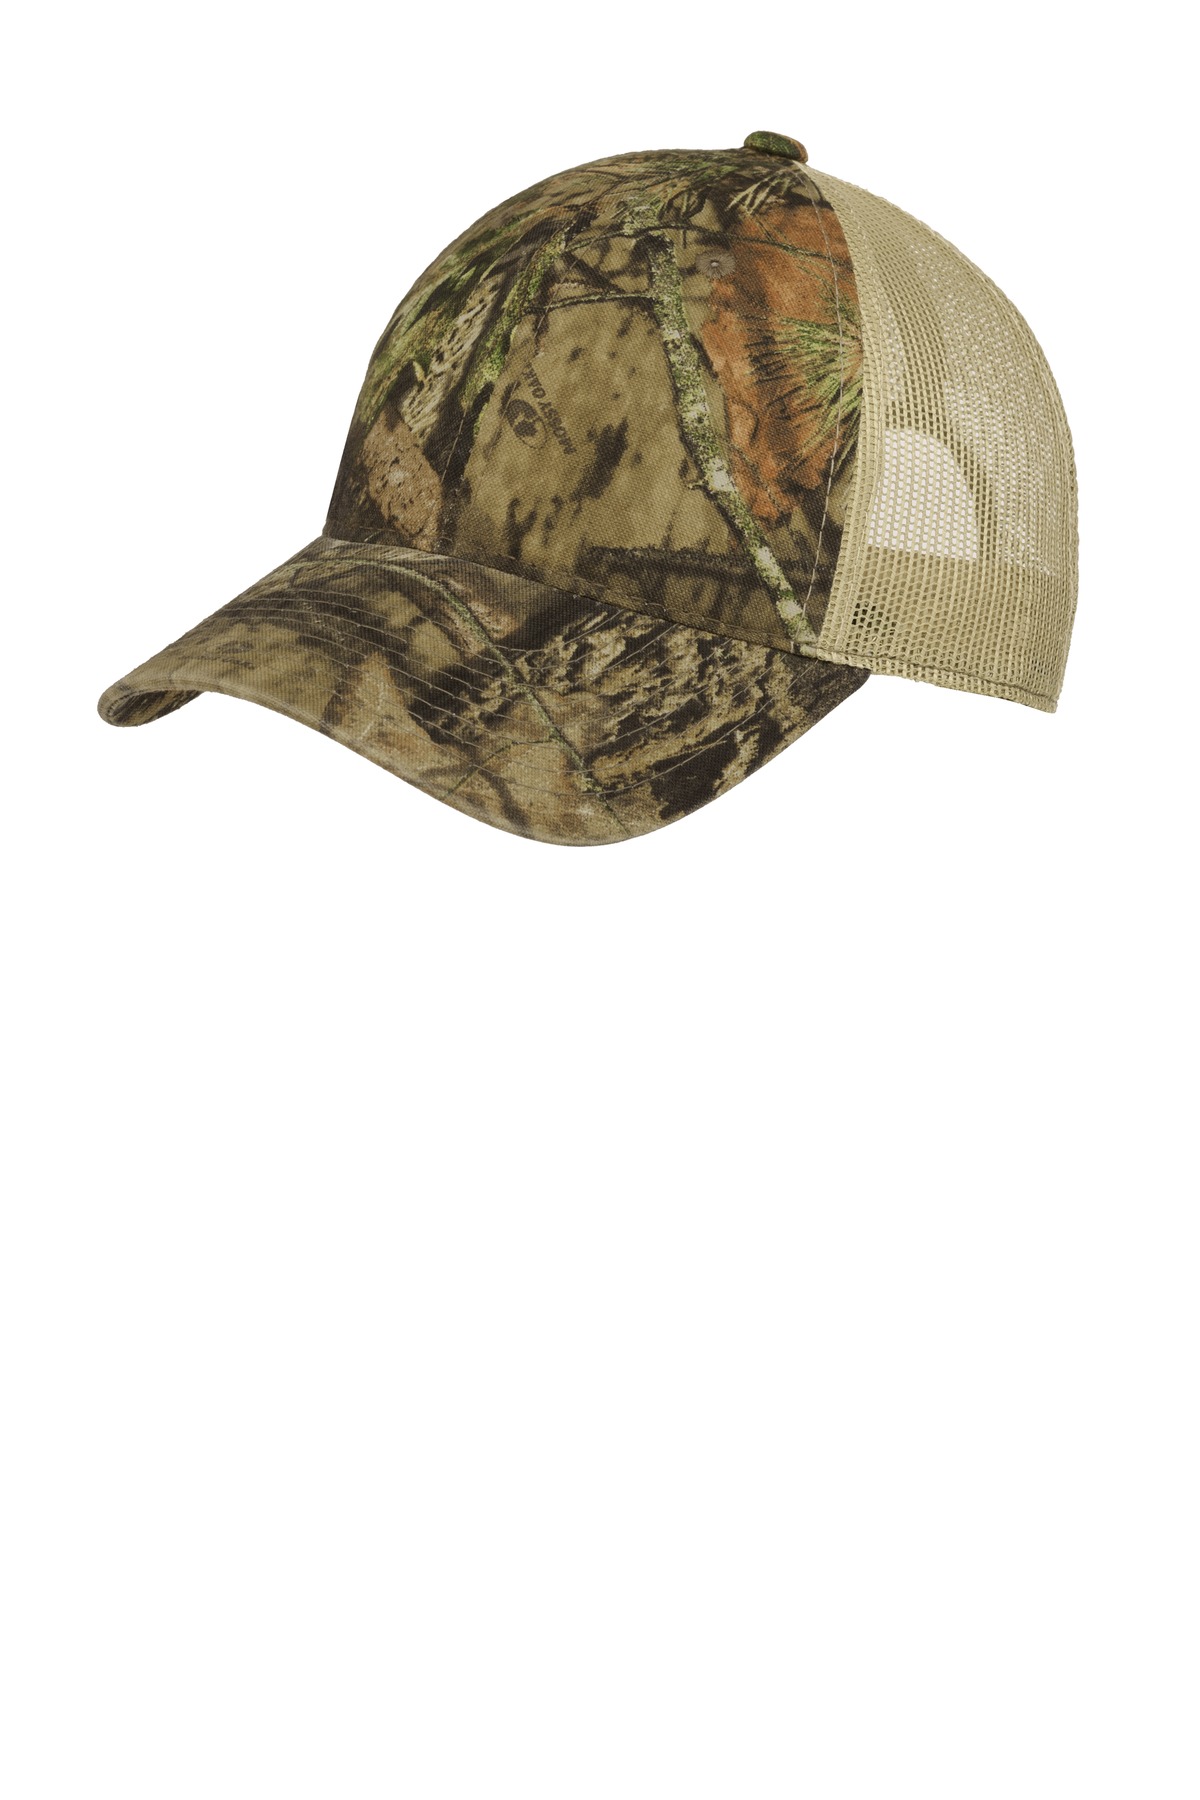 Port Authority Unstructured Camouflage Mesh Back Cap - C929